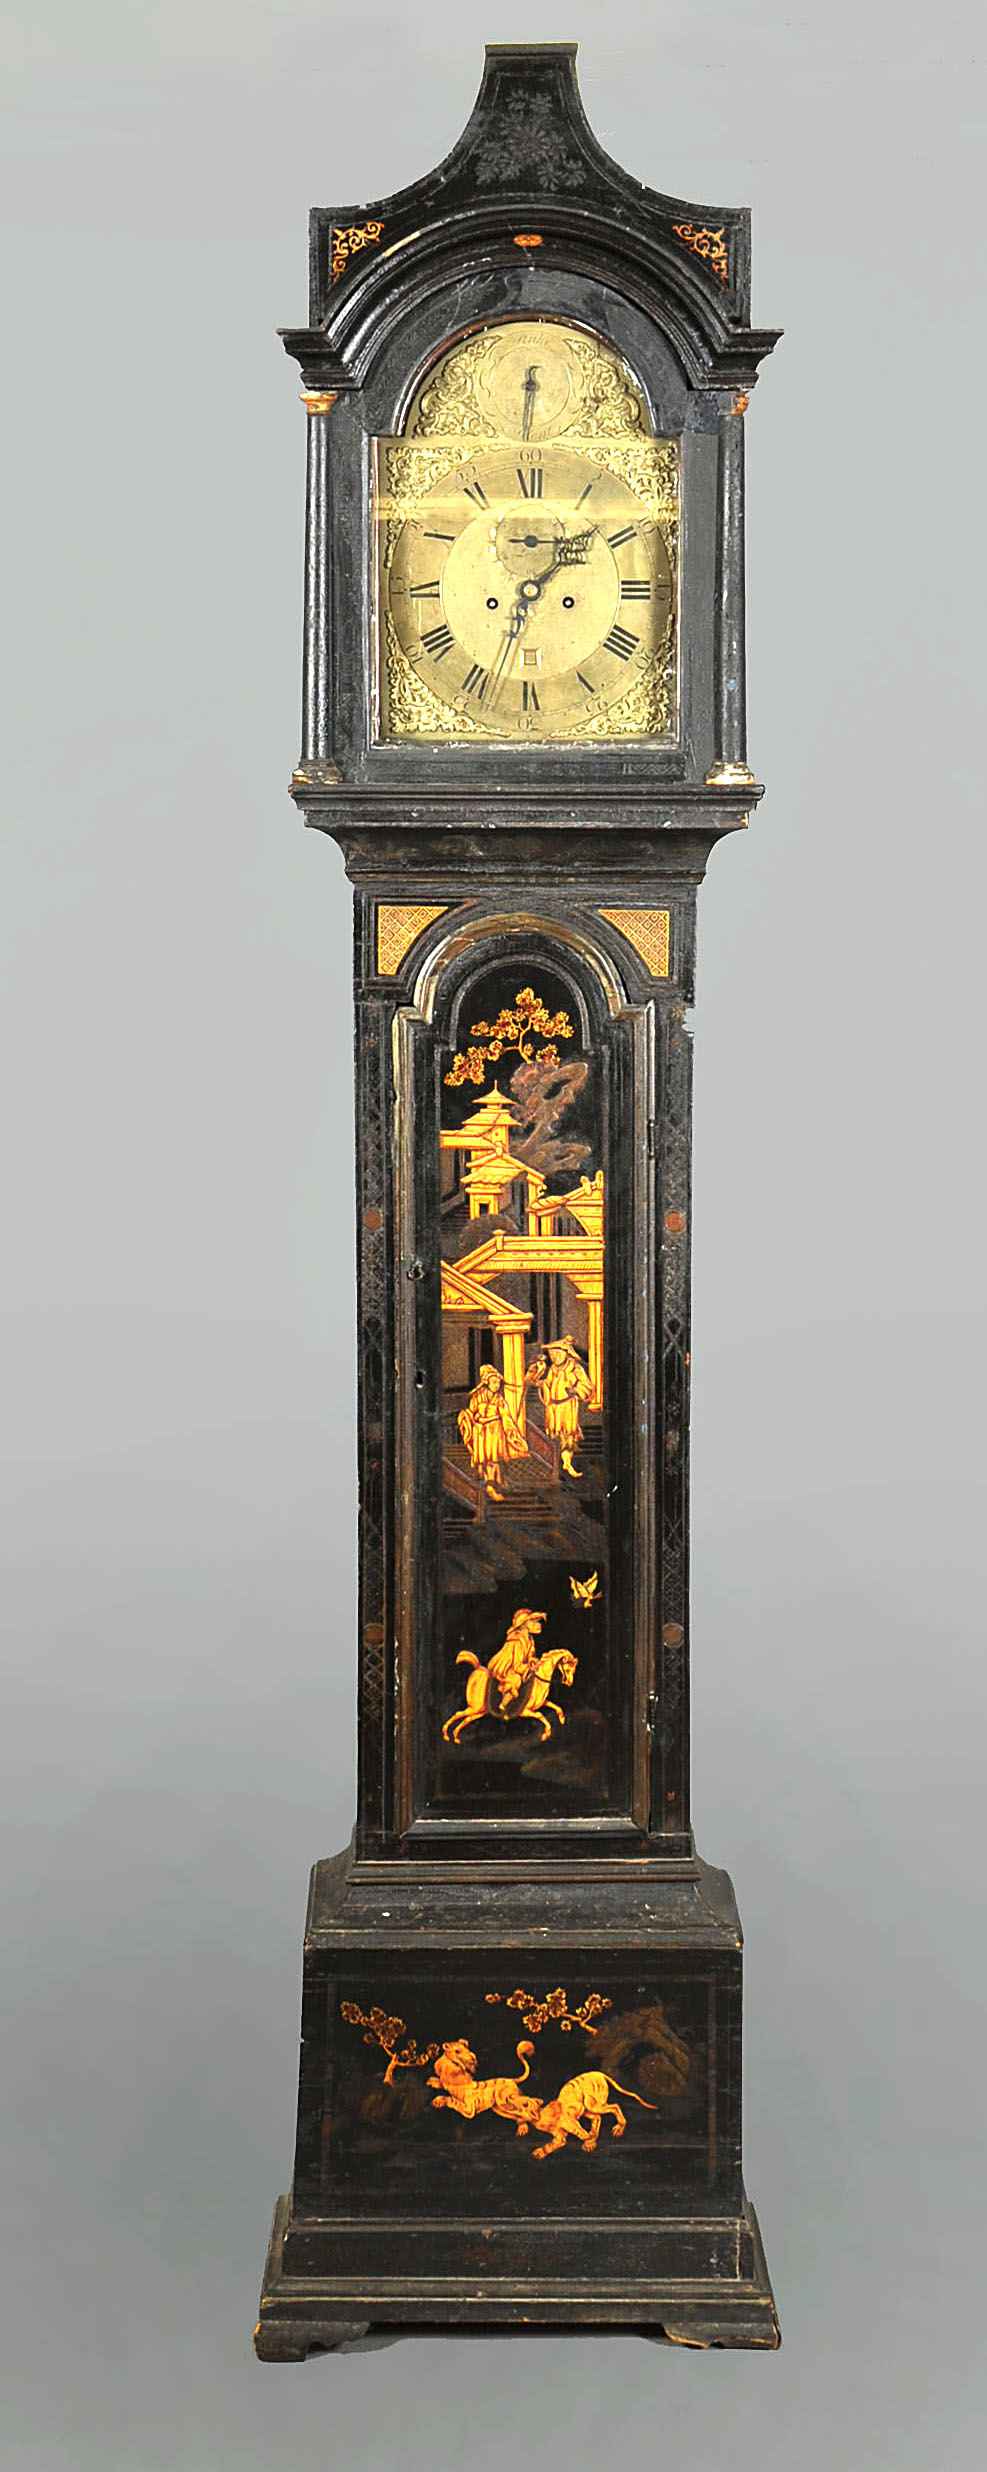 A mid 18c eight day longcase clock, the 12"" arched brass dial signed David Rivers, London and